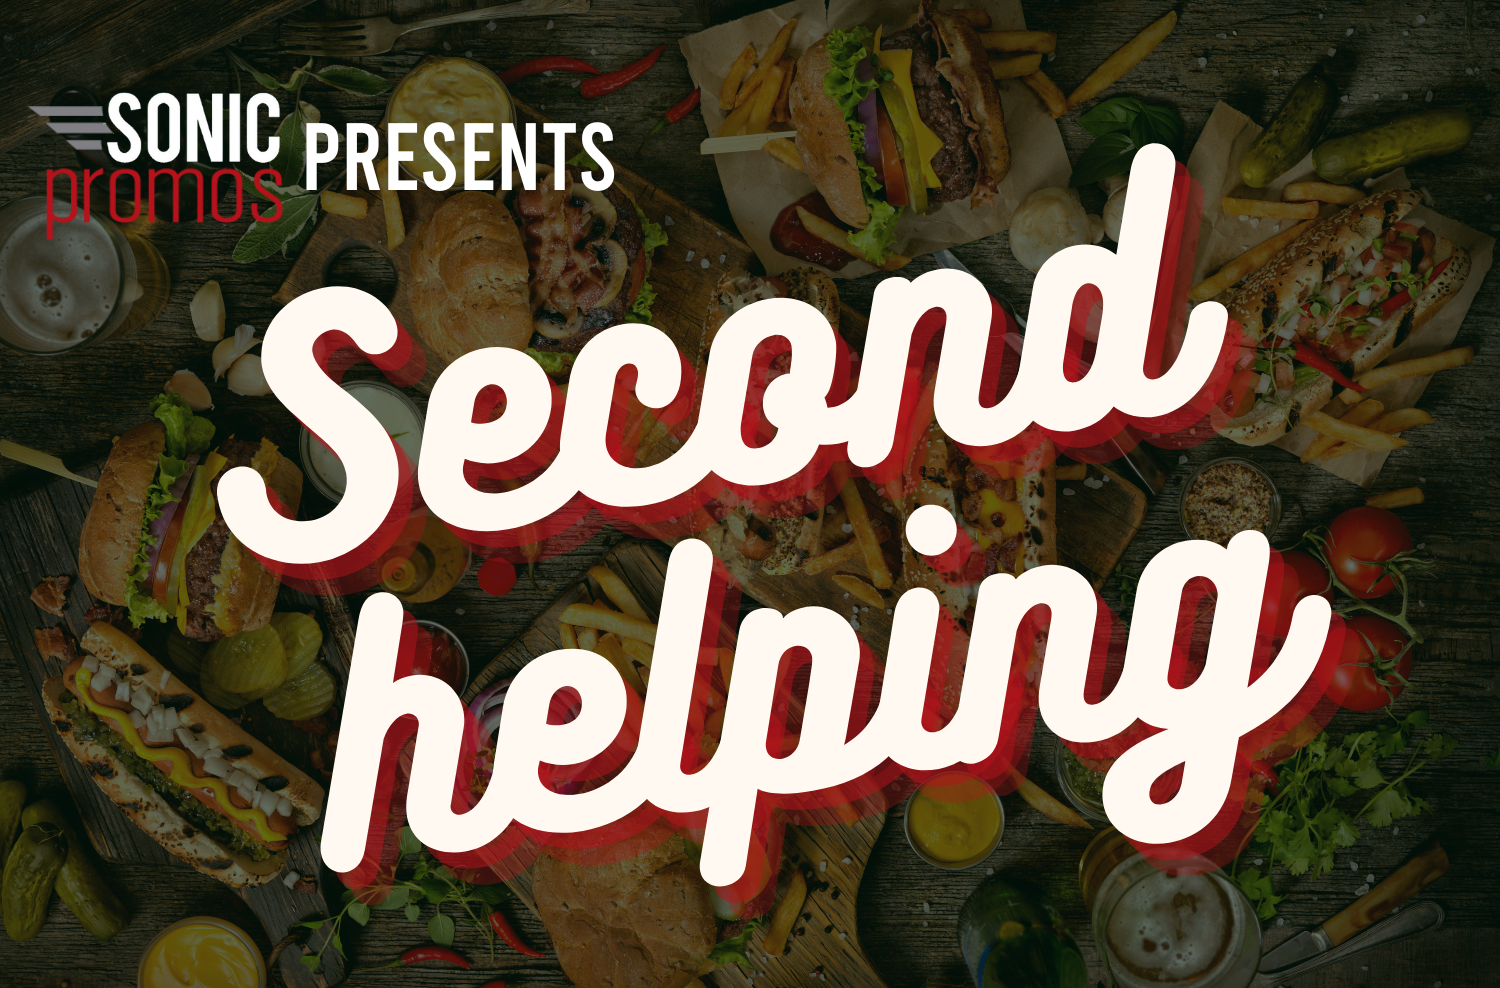 Introducing Second Helping!